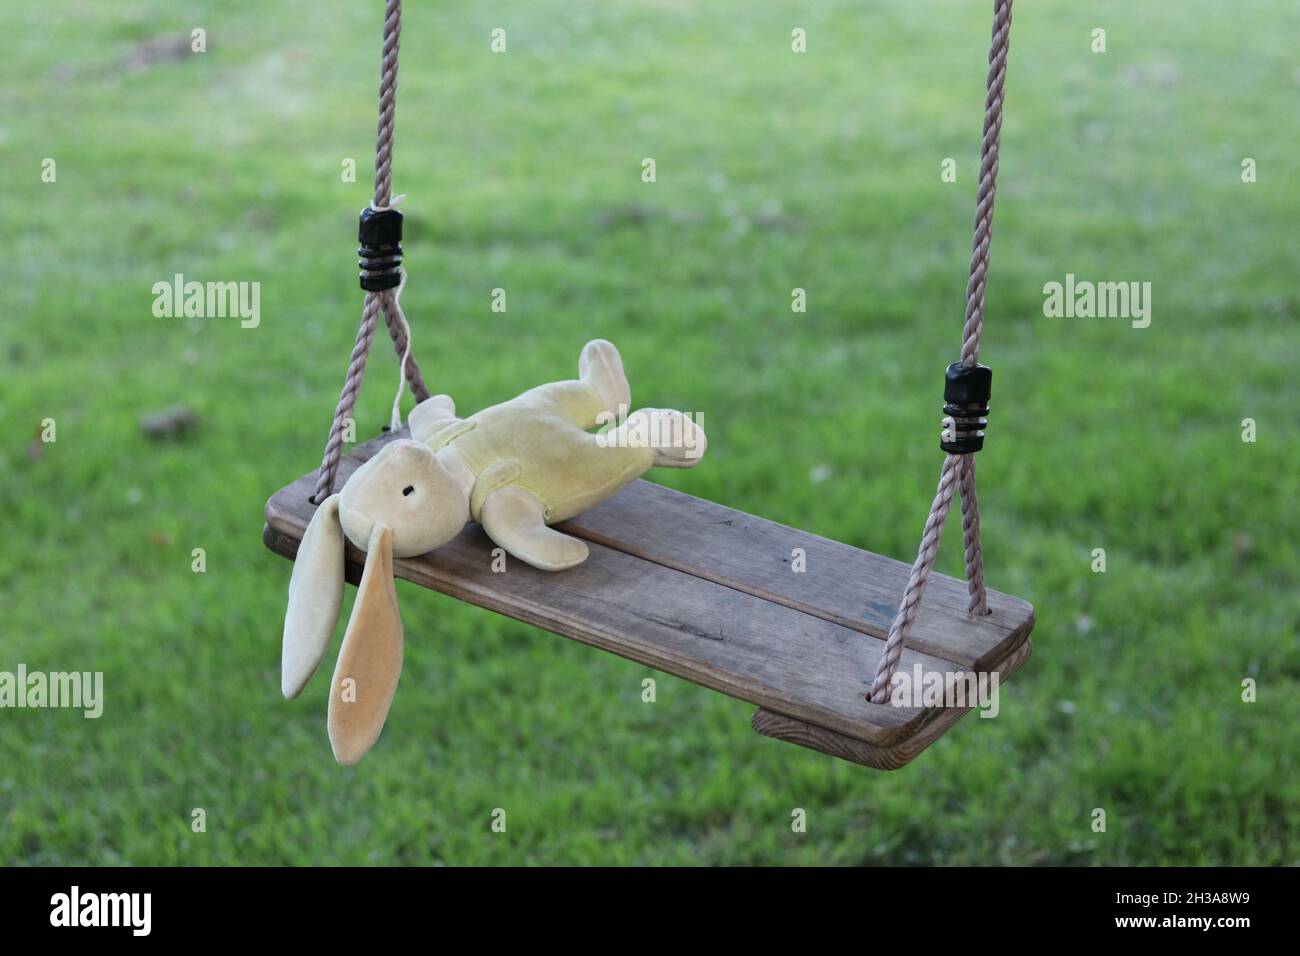 stuffed bunny lying on swing, concept for lost or missing child Stock Photo